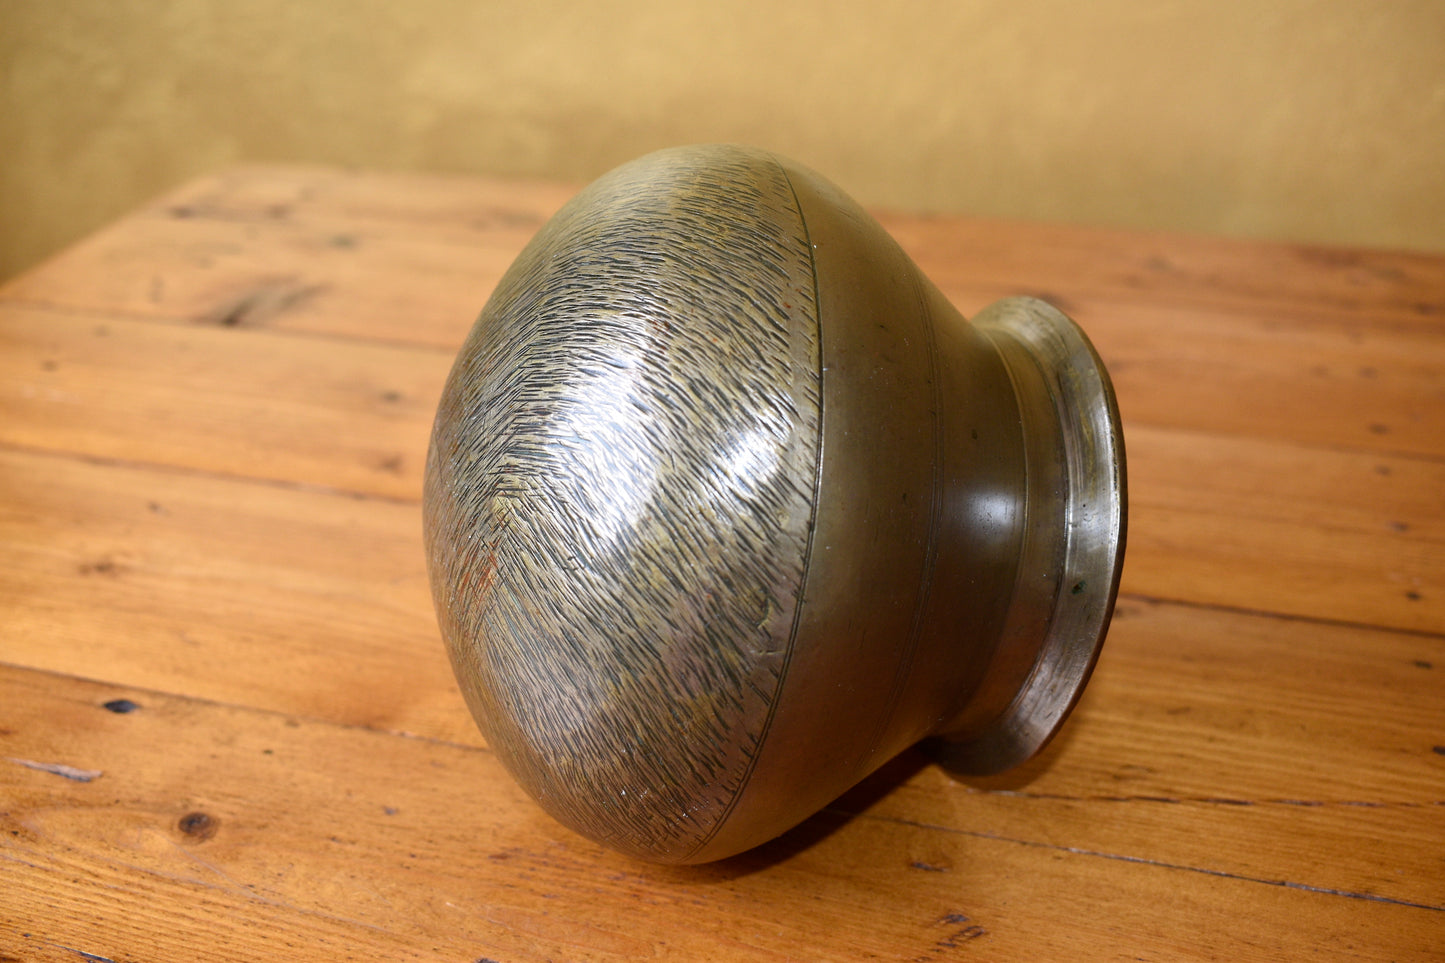 Antique Cast Brass Pot with Rounded Base and Cedar Folder Table